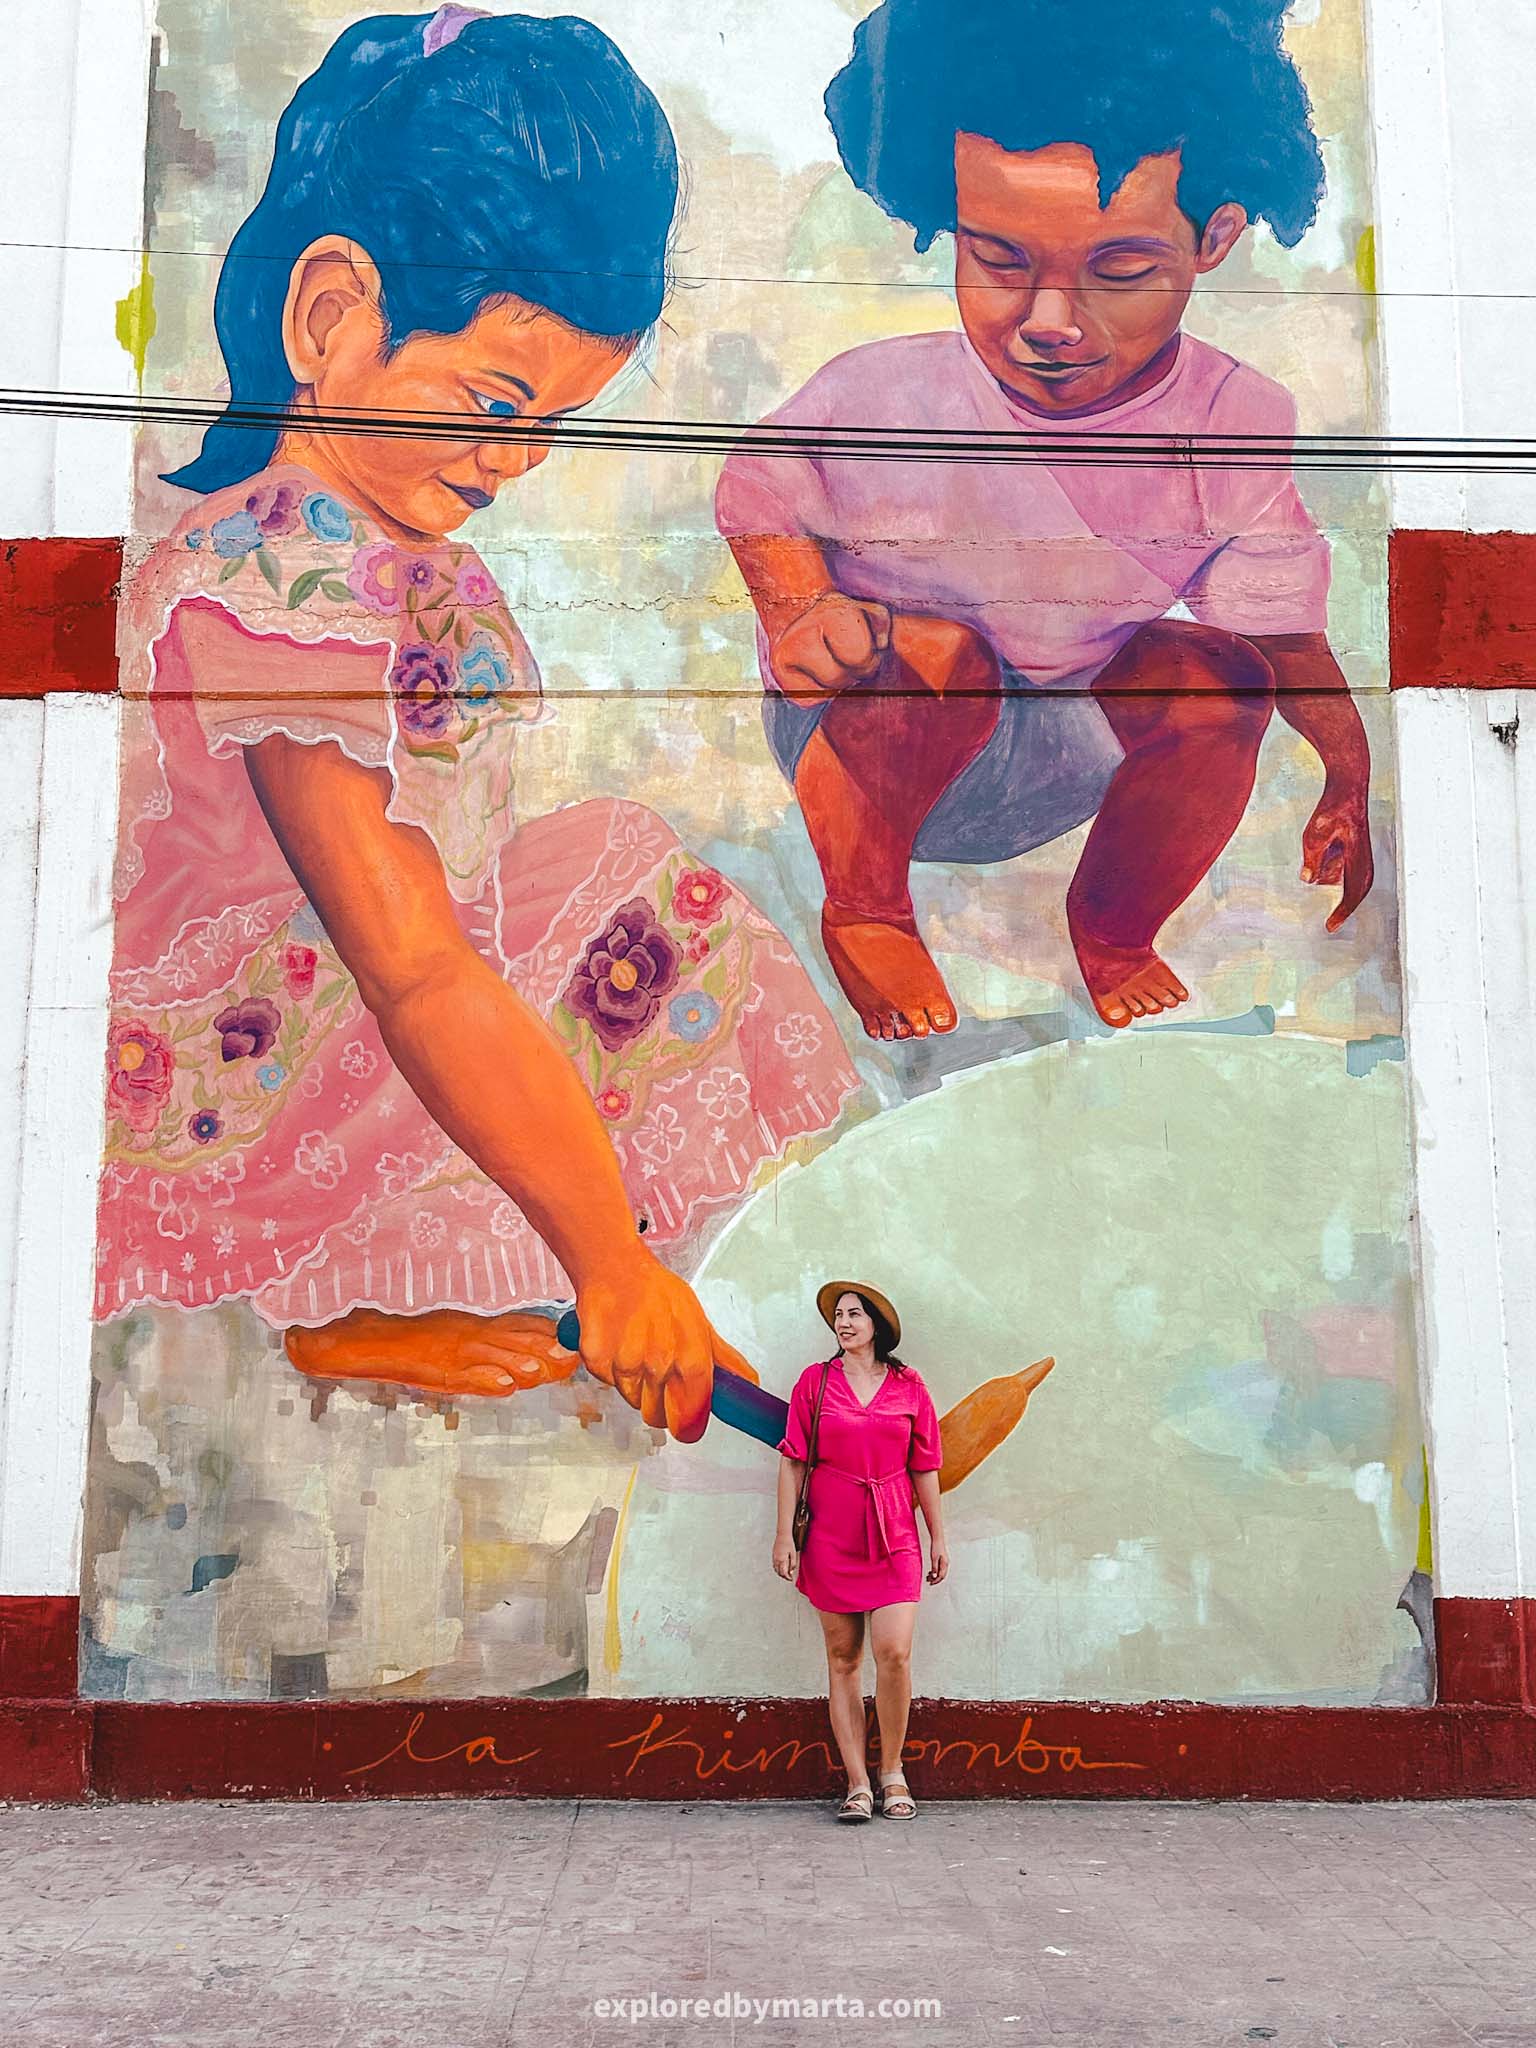 Bacalar, Mexico-street art and colorful photo spots in Bacalar